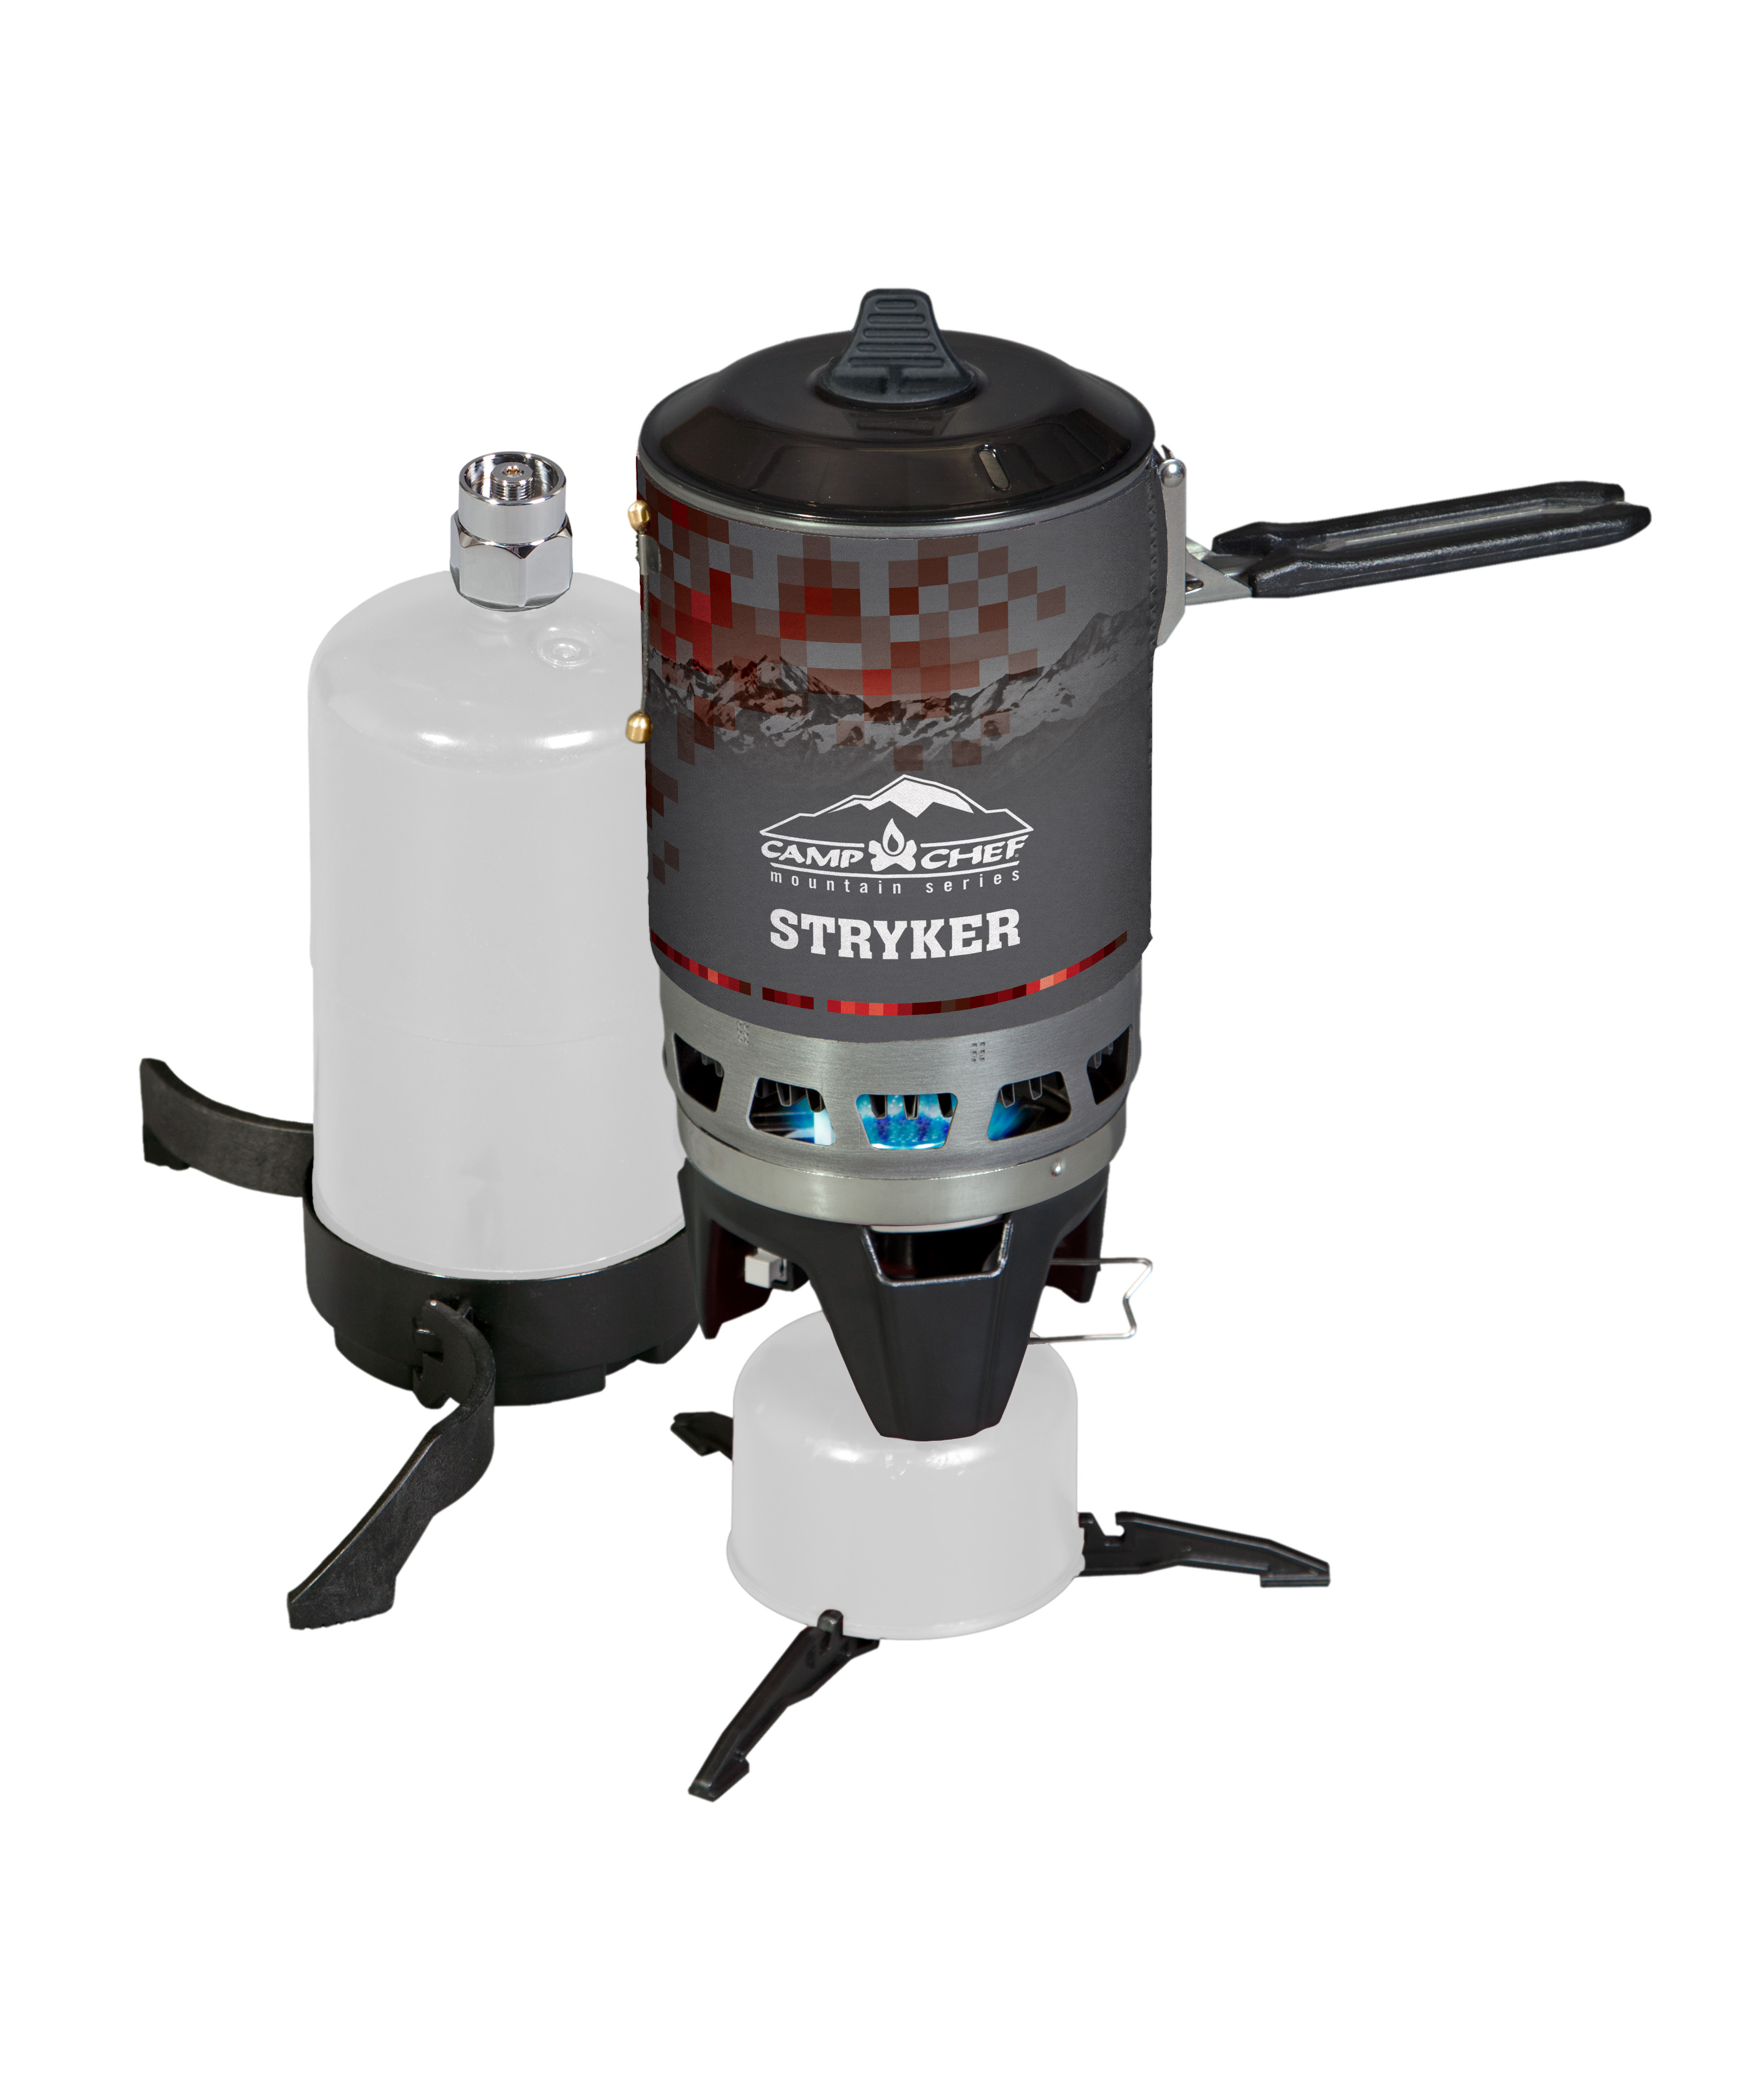 Camp Chef Stryker 200 Multi-Fuel Stove, MS200, 1 Burner - image 1 of 10